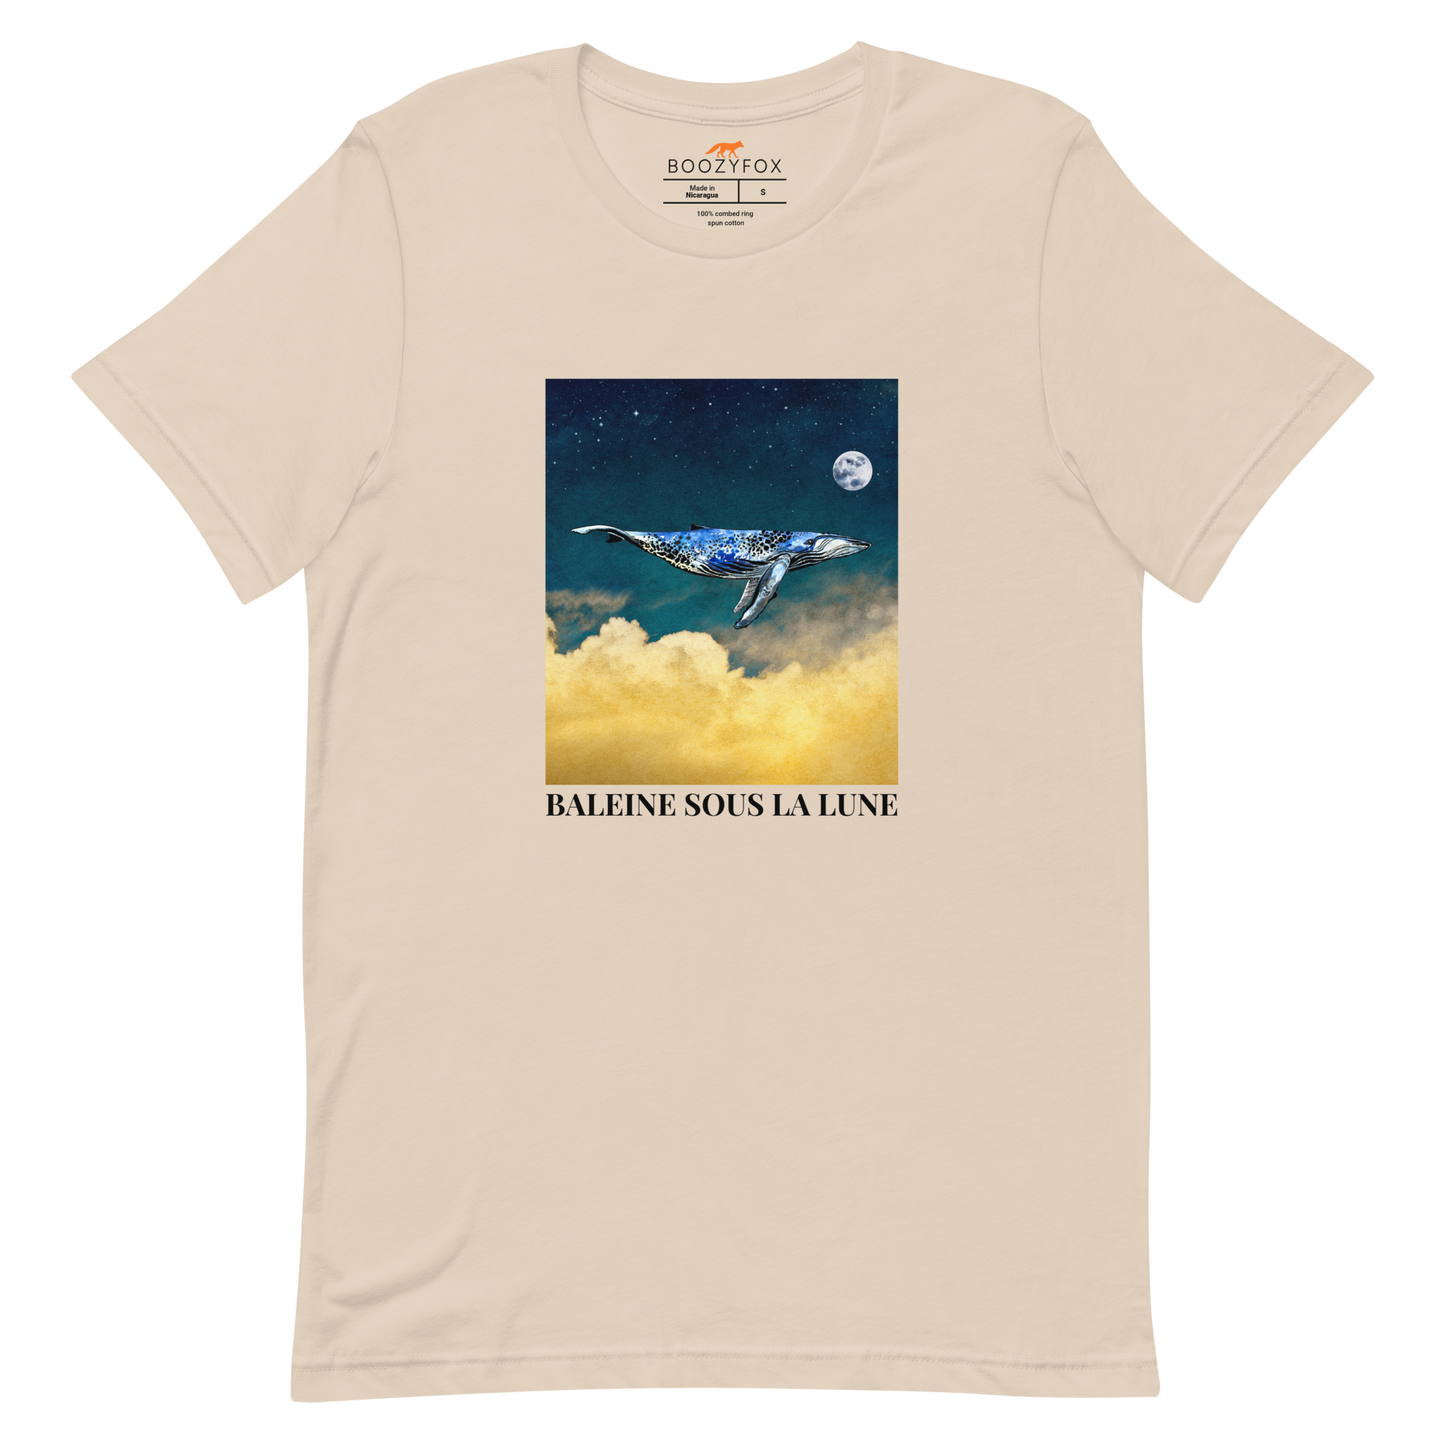 Soft Cream Premium Whale T-Shirt featuring a majestic Whale Under The Moon graphic on the chest - Cool Graphic Whale Tees - Boozy Fox